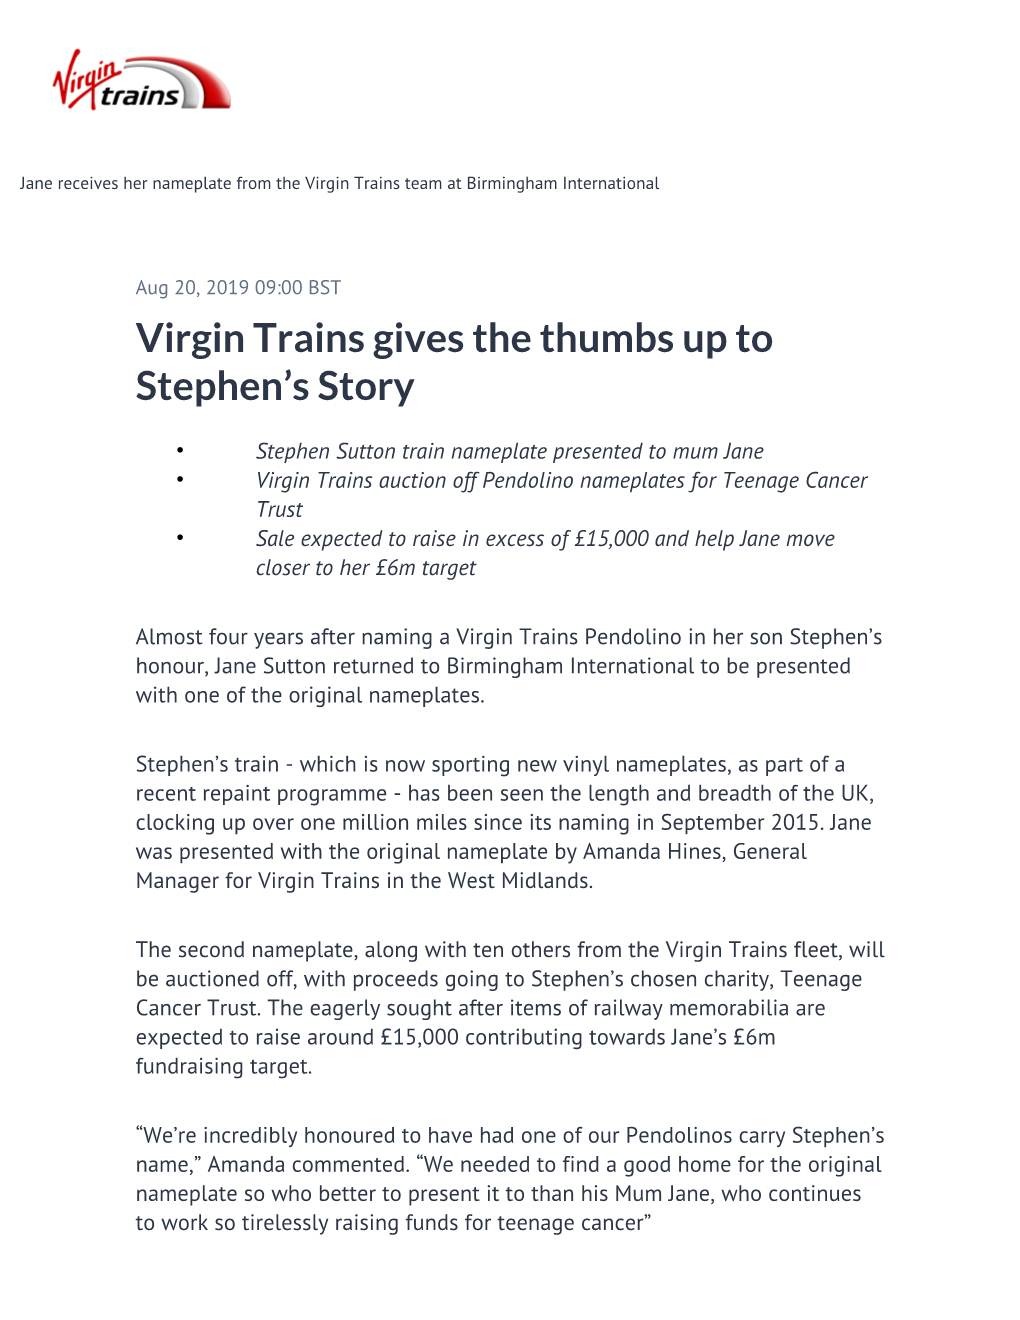 Virgin Trains Gives the Thumbs up to Stephen's Story